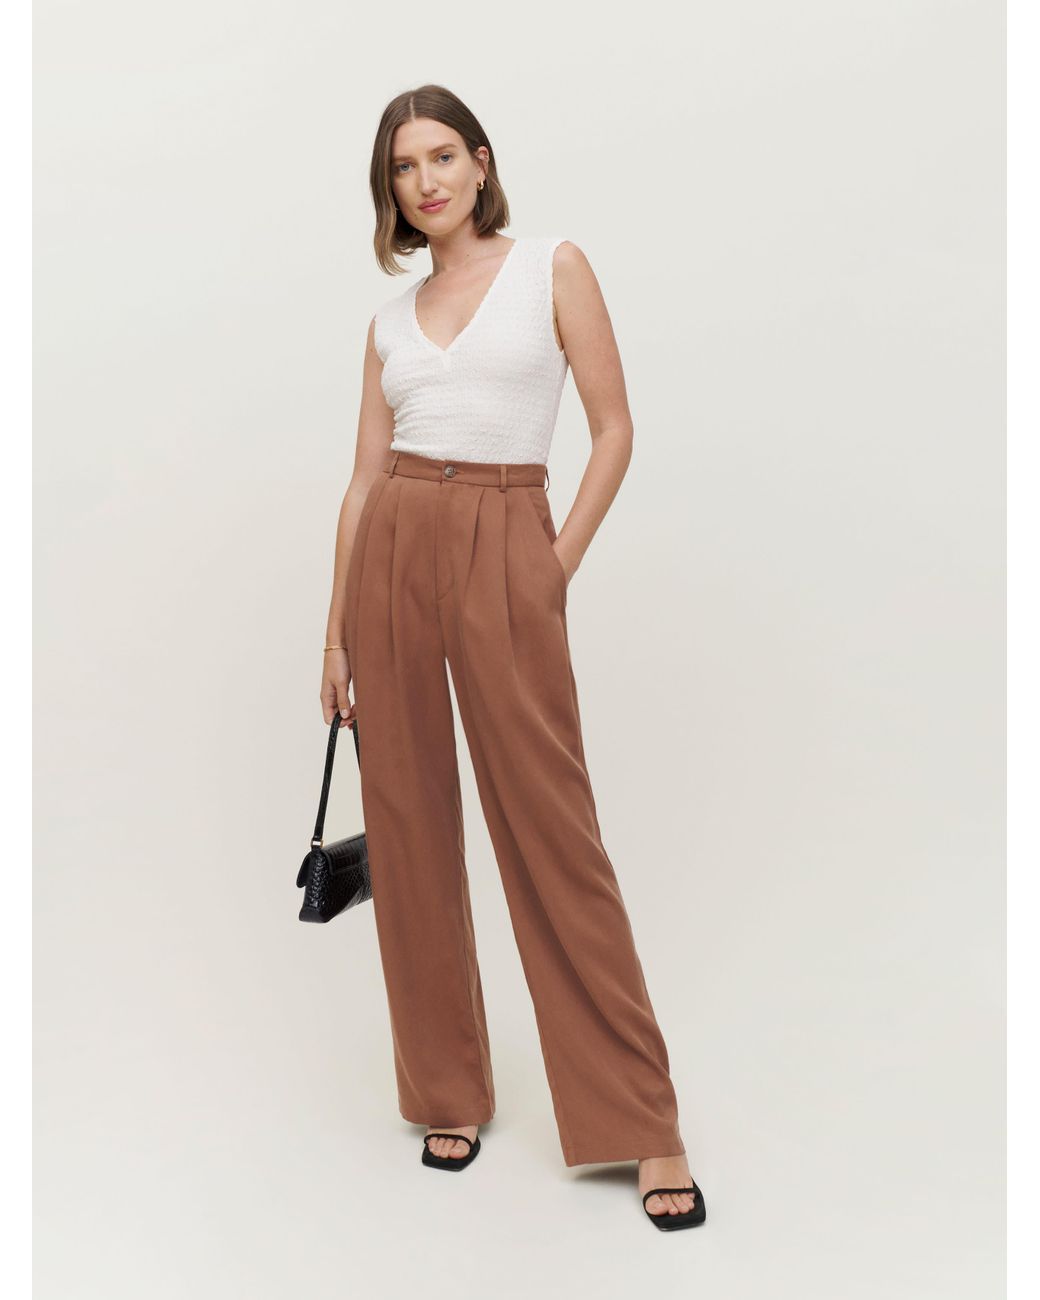 Reformation Mason Pant in Natural | Lyst